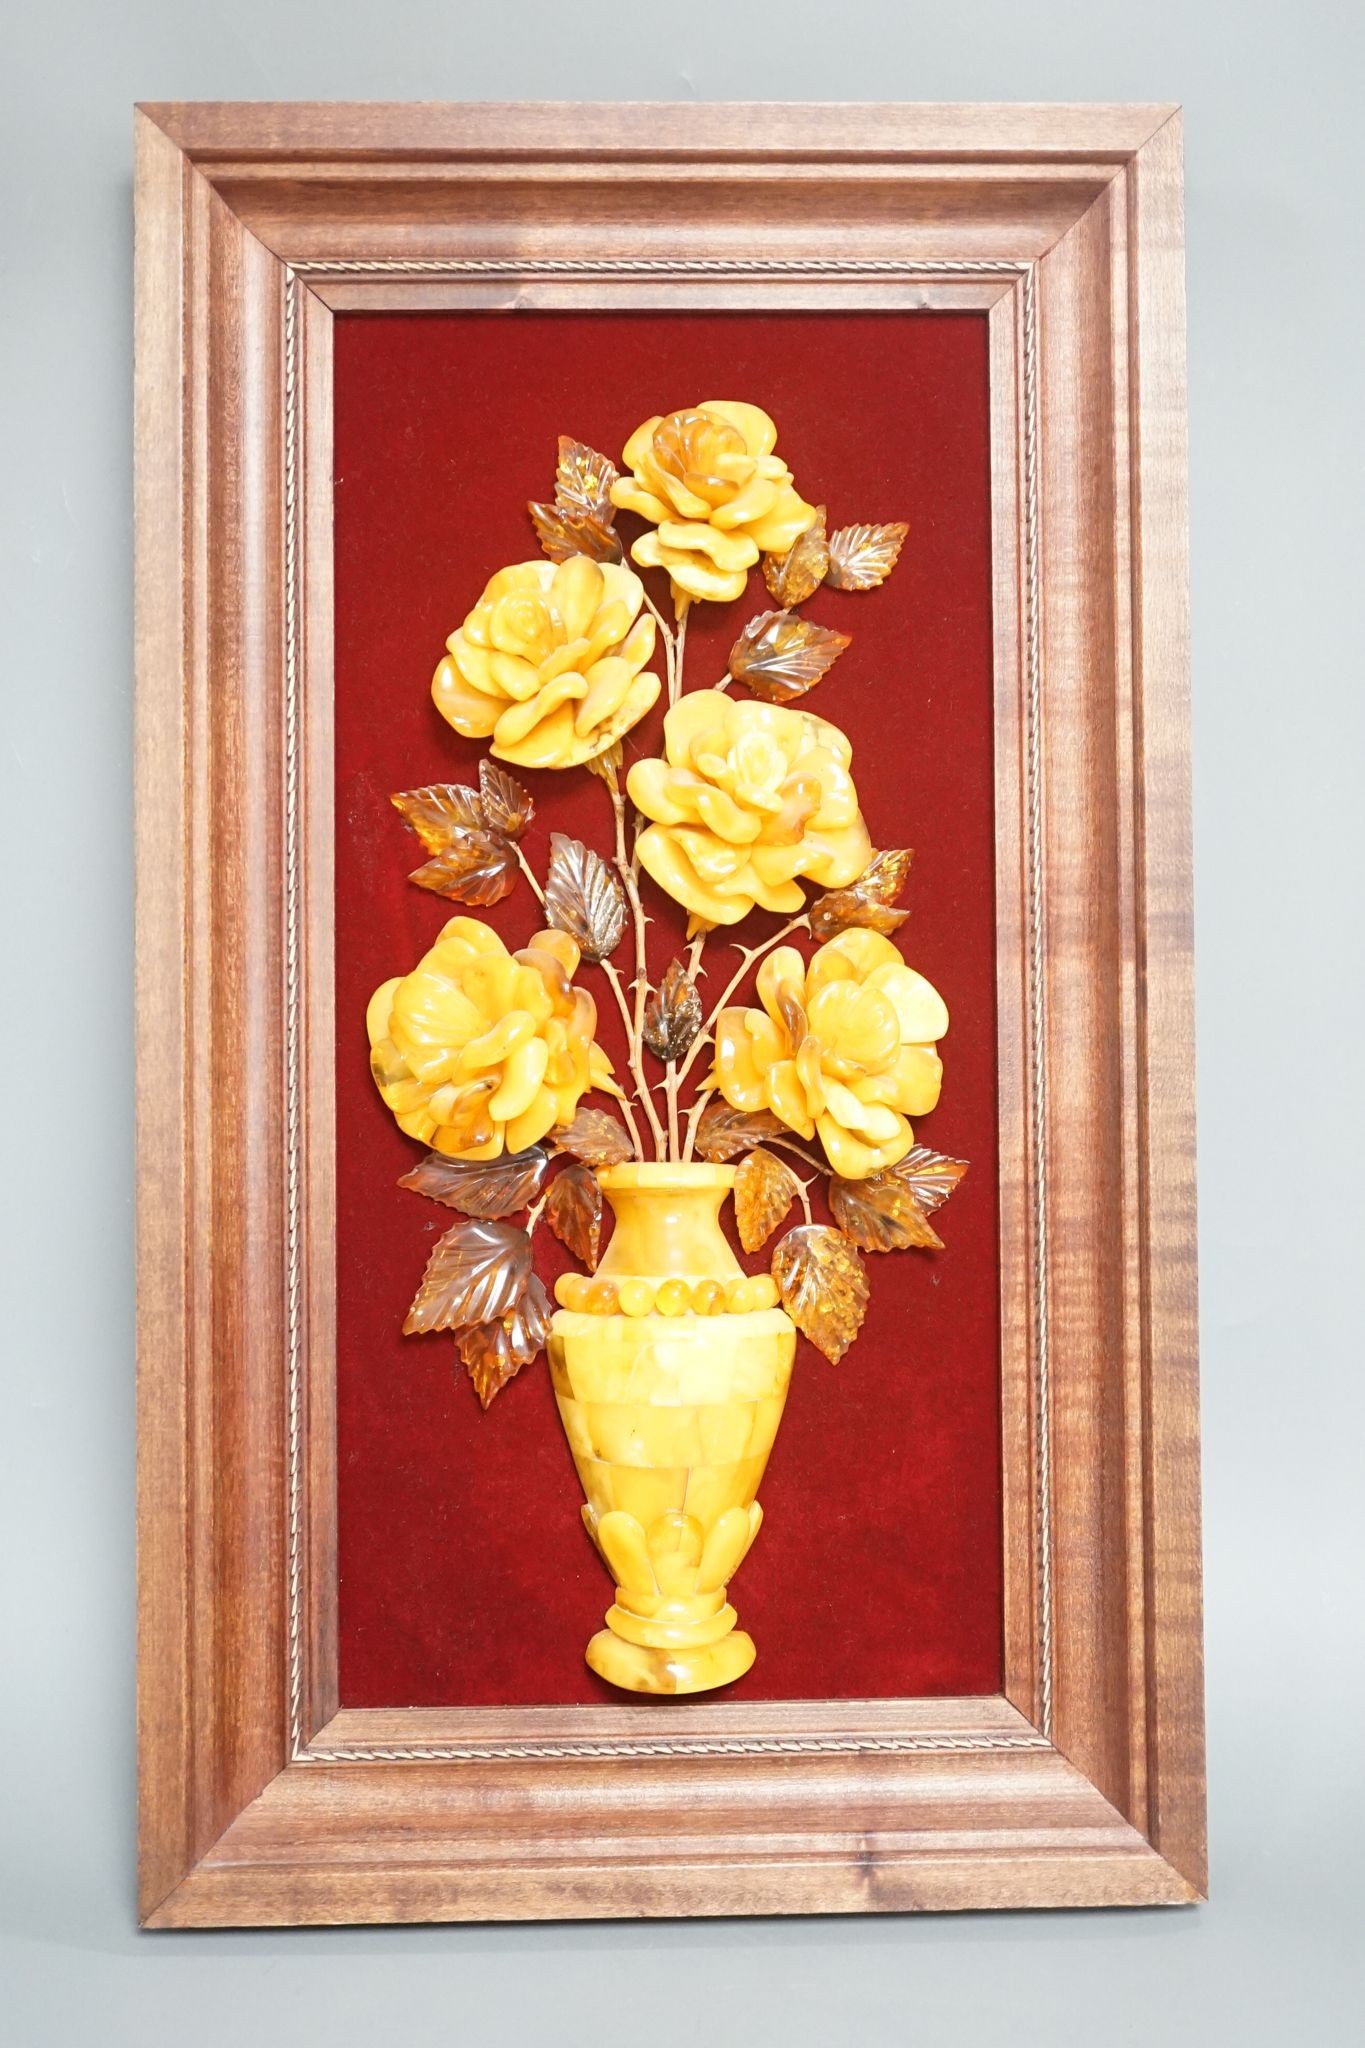 A carved amber panel from the Hermitage Museum shop, St Petersburg, roses in a vase. 49x39cm including frame